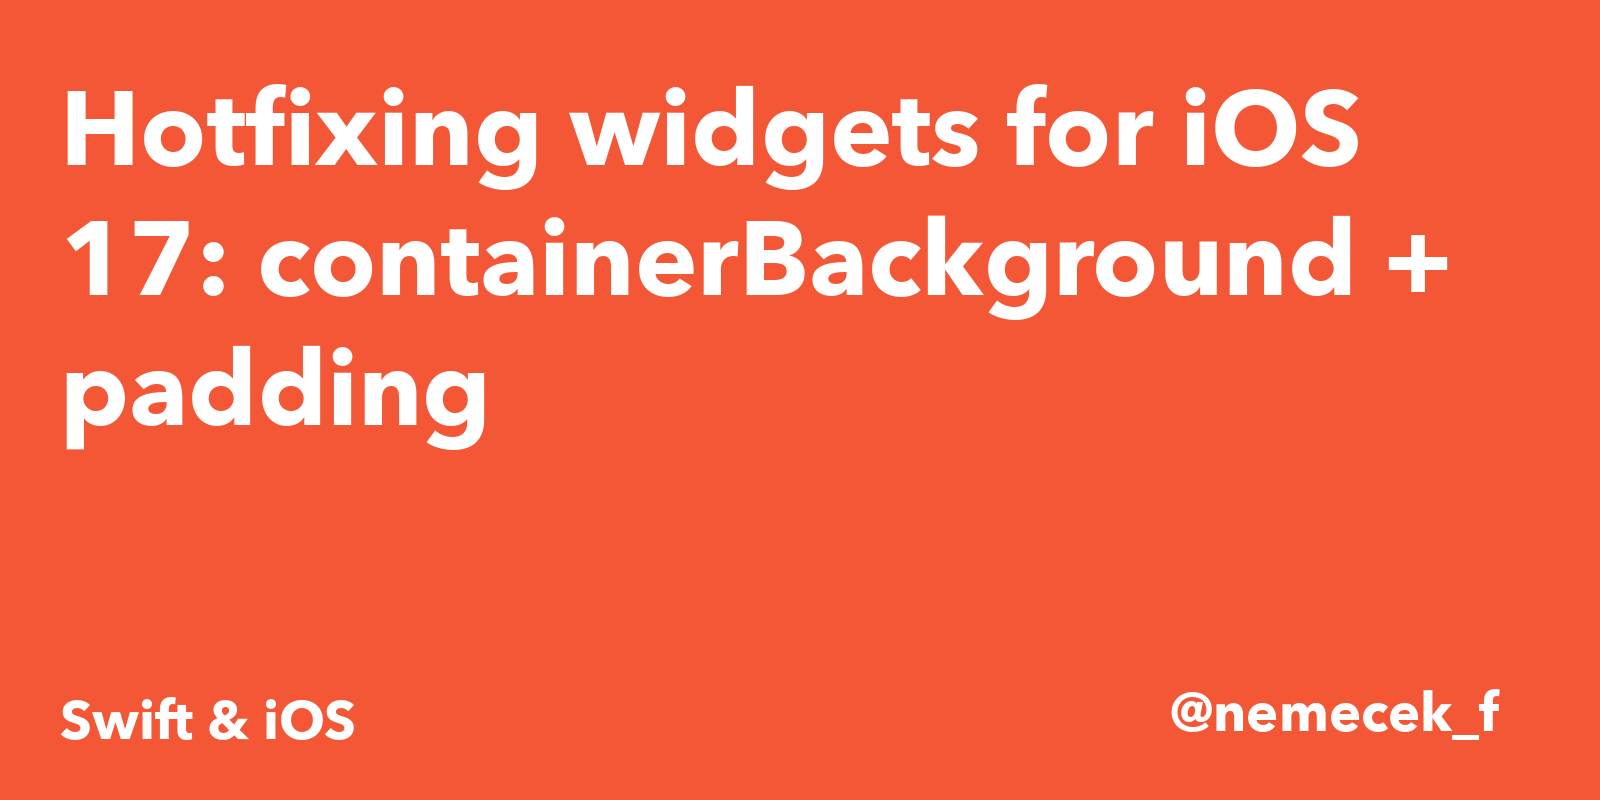 Hotfixing widgets for iOS 17: containerBackground + padding